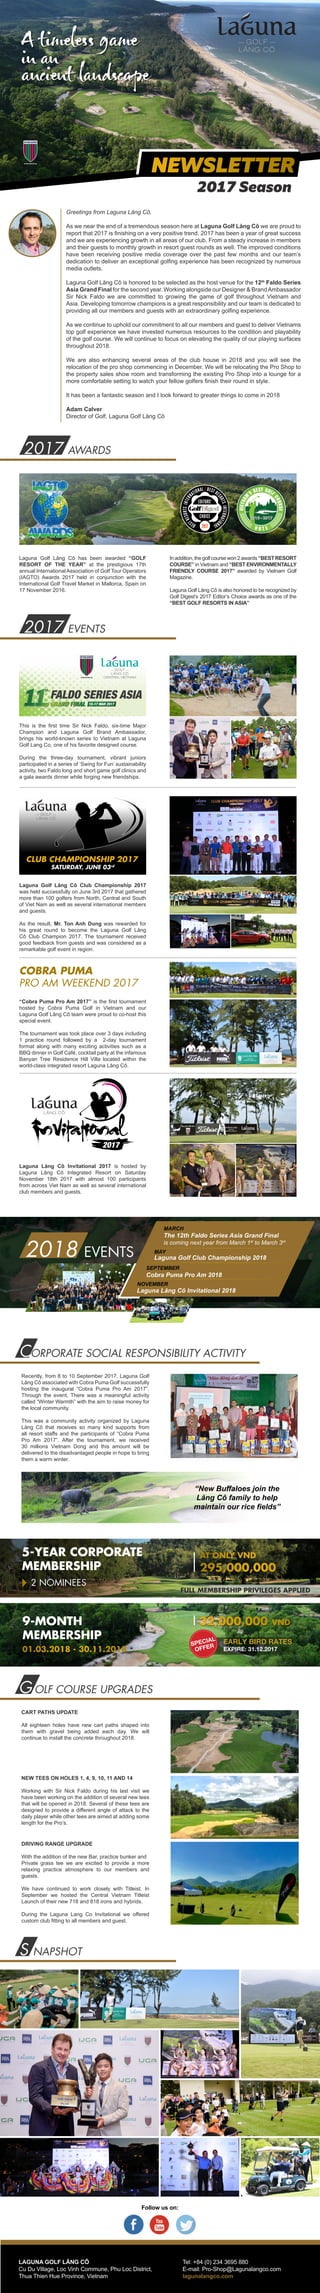 Greetings from Laguna Lăng Cô,
As we near the end of a tremendous season here at Laguna Golf Lăng Cô we are proud to
report that 2017 is finishing on a very positive trend. 2017 has been a year of great success
and we are experiencing growth in all areas of our club. From a steady increase in members
and their guests to monthly growth in resort guest rounds as well. The improved conditions
have been receiving positive media coverage over the past few months and our team’s
dedication to deliver an exceptional golfing experience has been recognized by numerous
media outlets.
Laguna Golf Lăng Cô is honored to be selected as the host venue for the 12th
Faldo Series
Asia Grand Final for the second year. Working alongside our Designer & BrandAmbassador
Sir Nick Faldo we are committed to growing the game of golf throughout Vietnam and
Asia. Developing tomorrow champions is a great responsibility and our team is dedicated to
providing all our members and guests with an extraordinary golfing experience.
As we continue to uphold our commitment to all our members and guest to deliver Vietnams
top golf experience we have invested numerous resources to the condition and playability
of the golf course. We will continue to focus on elevating the quality of our playing surfaces
throughout 2018.
We are also enhancing several areas of the club house in 2018 and you will see the
relocation of the pro shop commencing in December. We will be relocating the Pro Shop to
the property sales show room and transforming the existing Pro Shop into a lounge for a
more comfortable setting to watch your fellow golfers finish their round in style.
It has been a fantastic season and I look forward to greater things to come in 2018
Adam Calver
Director of Golf, Laguna Golf Lăng Cô
This is the first time Sir Nick Faldo, six-time Major
Champion and Laguna Golf Brand Ambassador,
brings his world-known series to Vietnam at Laguna
Golf Lang Co, one of his favorite designed course.
During the three-day tournament, vibrant juniors
participated in a series of ‘Swing for Fun’ sustainability
activity, two Faldo long and short game golf clinics and
a gala awards dinner while forging new friendships.
Laguna Golf Lăng Cô Club Championship 2017
was held successfully on June 3rd 2017 that gathered
more than 100 golfers from North, Central and South
of Viet Nam as well as several international members
and guests.
As the result, Mr. Ton Anh Dung was rewarded for
his great round to become the Laguna Golf Lăng
Cô Club Champion 2017. The tournament received
good feedback from guests and was considered as a
remarkable golf event in region.
Recently, from 8 to 10 September 2017, Laguna Golf
Lăng Cô associated with Cobra Puma Golf successfully
hosting the inaugural “Cobra Puma Pro Am 2017”.
Through the event, There was a meaningful activity
called “Winter Warmth” with the aim to raise money for
the local community.
This was a community activity organized by Laguna
Lăng Cô that receives so many kind supports from
all resort staffs and the participants of “Cobra Puma
Pro Am 2017”. After the tournament, we received
30 millions Vietnam Dong and this amount will be
delivered to the disadvantaged people in hope to bring
them a warm winter.
Follow us on:
LAGUNA GOLF LĂNG CÔ
Cu Du Village, Loc Vinh Commune, Phu Loc District,
Thua Thien Hue Province, Vietnam
Tel: +84 (0) 234 3695 880
E-mail: Pro-Shop@Lagunalangco.com
lagunalangco.com
S NAPSHOT
2017 EVENTS
2017 AWARDS
CORPORATE SOCIAL RESPONSIBILITY ACTIVITY
SATURDAY, JUNE 03rd
Laguna Lăng Cô Invitational 2017 is hosted by
Laguna Lăng Cô Integrated Resort on Saturday
November 18th 2017 with almost 100 participants
from across Viet Nam as well as several international
club members and guests.
COBRA PUMA
PRO AM WEEKEND 2017
“Cobra Puma Pro Am 2017” is the first tournament
hosted by Cobra Puma Golf in Vietnam and our
Laguna Golf Lăng Cô team were proud to co-host this
special event.
The tournament was took place over 3 days including
1 practice round followed by a 2-day tournament
format along with many exciting activities such as a
BBQ dinner in Golf Café, cocktail party at the infamous
Banyan Tree Residence Hill Villa located within the
world-class integrated resort Laguna Lăng Cô.
FULL MEMBERSHIP PRIVILEGES APPLIED
5-YEAR CORPORATE
MEMBERSHIP
AT ONLY VND
295,000,000
2 NOMINEES
“New Buffaloes join the
Lăng Cô family to help
maintain our rice fields”
G OLF COURSE UPGRADES
CART PATHS UPDATE
All eighteen holes have new cart paths shaped into
them with gravel being added each day. We will
continue to install the concrete throughout 2018.
NEW TEES ON HOLES 1, 4, 9, 10, 11 AND 14
Working with Sir Nick Faldo during his last visit we
have been working on the addition of several new tees
that will be opened in 2018. Several of these tees are
designed to provide a different angle of attack to the
daily player while other tees are aimed at adding some
length for the Pro’s.
DRIVING RANGE UPGRADE
With the addition of the new Bar, practice bunker and
Private grass tee we are excited to provide a more
relaxing practice atmosphere to our members and
guests.
We have continued to work closely with Titleist. In
September we hosted the Central Vietnam Titleist
Launch of their new 718 and 818 irons and hybrids.
During the Laguna Lang Co Invitational we offered
custom club fitting to all members and guest.
Laguna Golf Lăng Cô has been awarded “GOLF
RESORT OF THE YEAR” at the prestigious 17th
annual InternationalAssociation of Golf Tour Operators
(IAGTO) Awards 2017 held in conjunction with the
International Golf Travel Market in Mallorca, Spain on
17 November 2016.
Inaddition,thegolfcoursewon2awards“BESTRESORT
COURSE” in Vietnam and “BEST ENVIRONMENTALLY
FRIENDLY COURSE 2017” awarded by Vietnam Golf
Magazine.
Laguna Golf Lăng Cô is also honored to be recognized by
Golf Digest’s 2017 Editor’s Choice awards as one of the
“BEST GOLF RESORTS IN ASIA”
2018 EVENTS
MARCH
MAY
SEPTEMBER
The 12th Faldo Series Asia Grand Final
is coming next year from March 1st
to March 3rd
Laguna Golf Club Championship 2018
Cobra Puma Pro Am 2018
Laguna Lăng Cô Invitational 2018
NOVEMBER
EARLY BIRD RATES
EXPIRE: 31.12.2017
9-MONTH
MEMBERSHIP
32,000,000 VND
01.03.2018 - 30.11.2018
SPECIAL
OFFER
NEWSLETTER
2017 Season
 